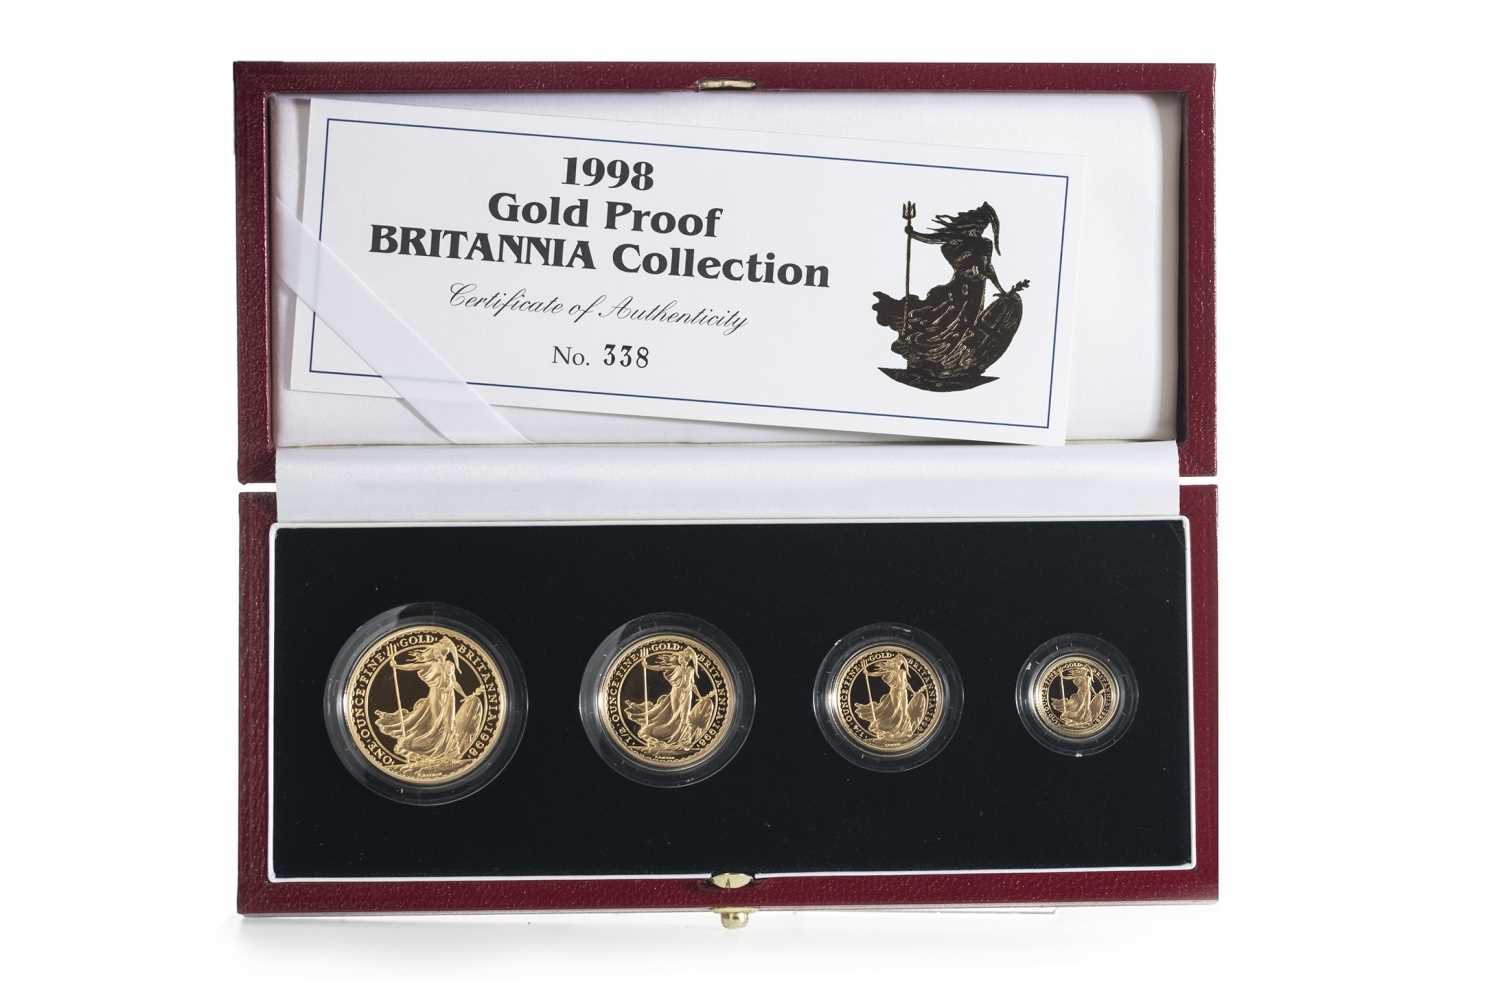 Lot 33 - 1998 GOLD PROOF BRITANNIA COLLECTION FOUR COIN SET